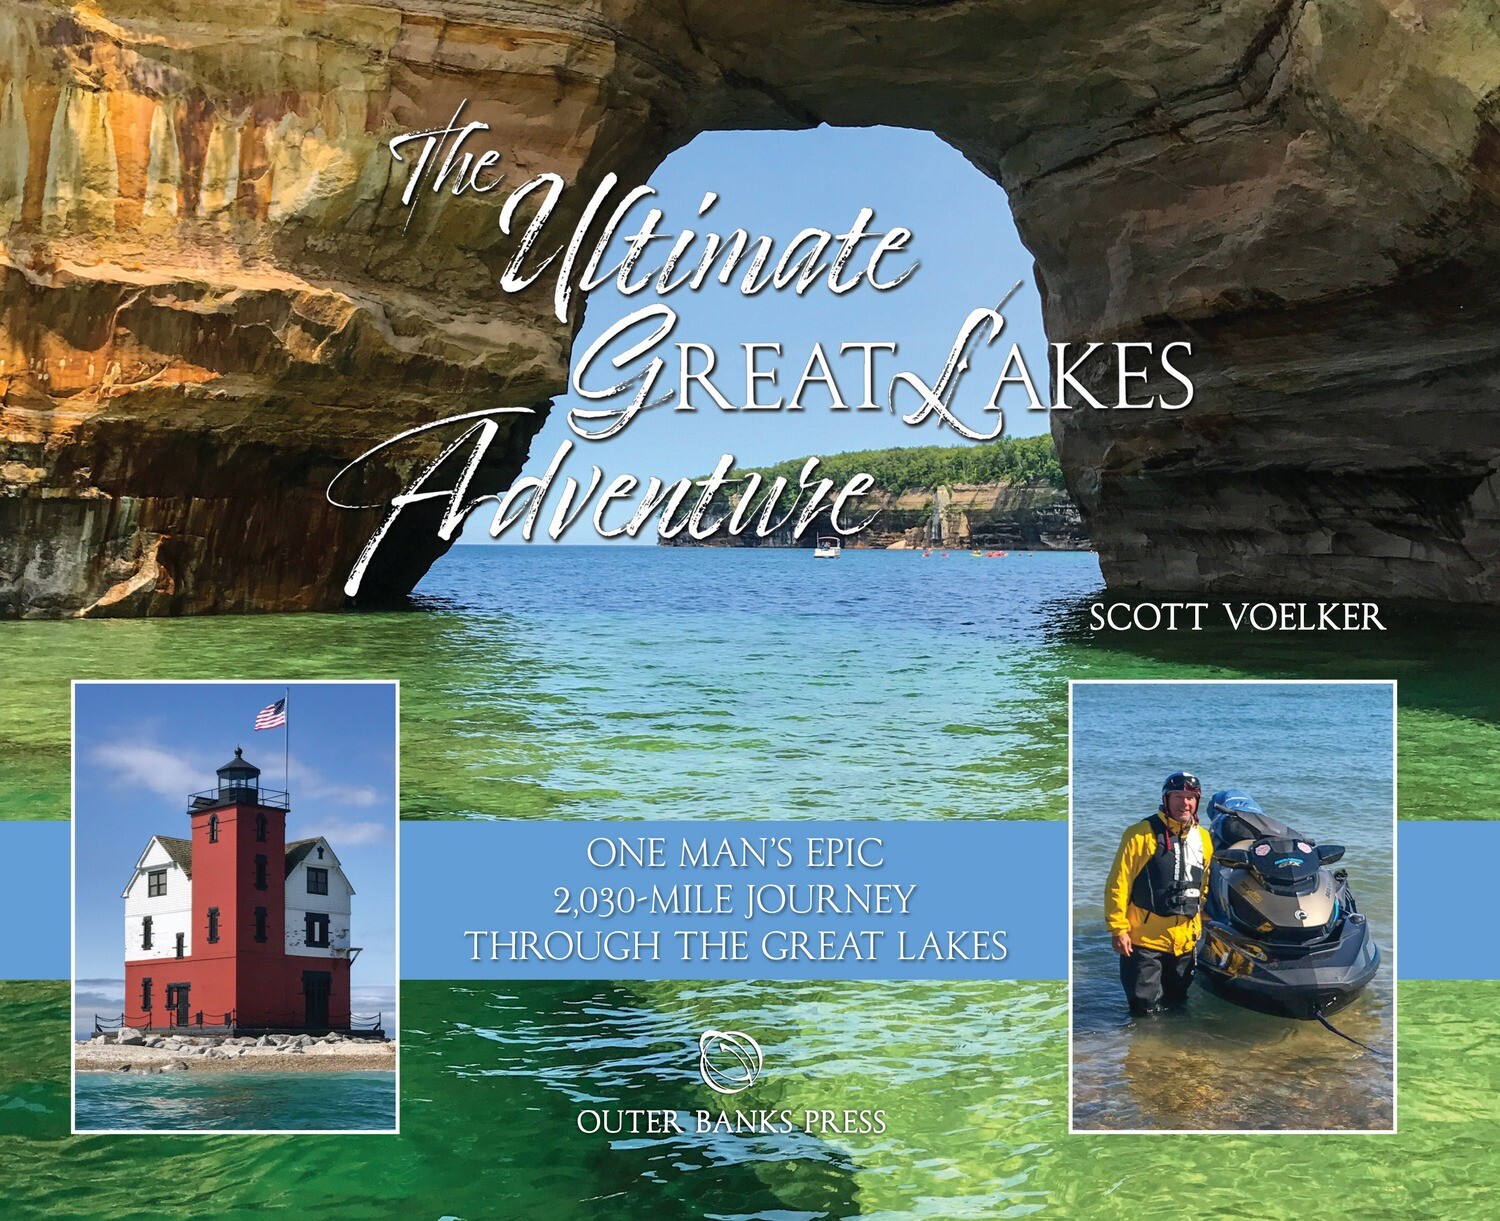 The Ultimate Great Lakes Adventure: One Man’s Epic 2,030-Mile Journey Through the Great Lakes